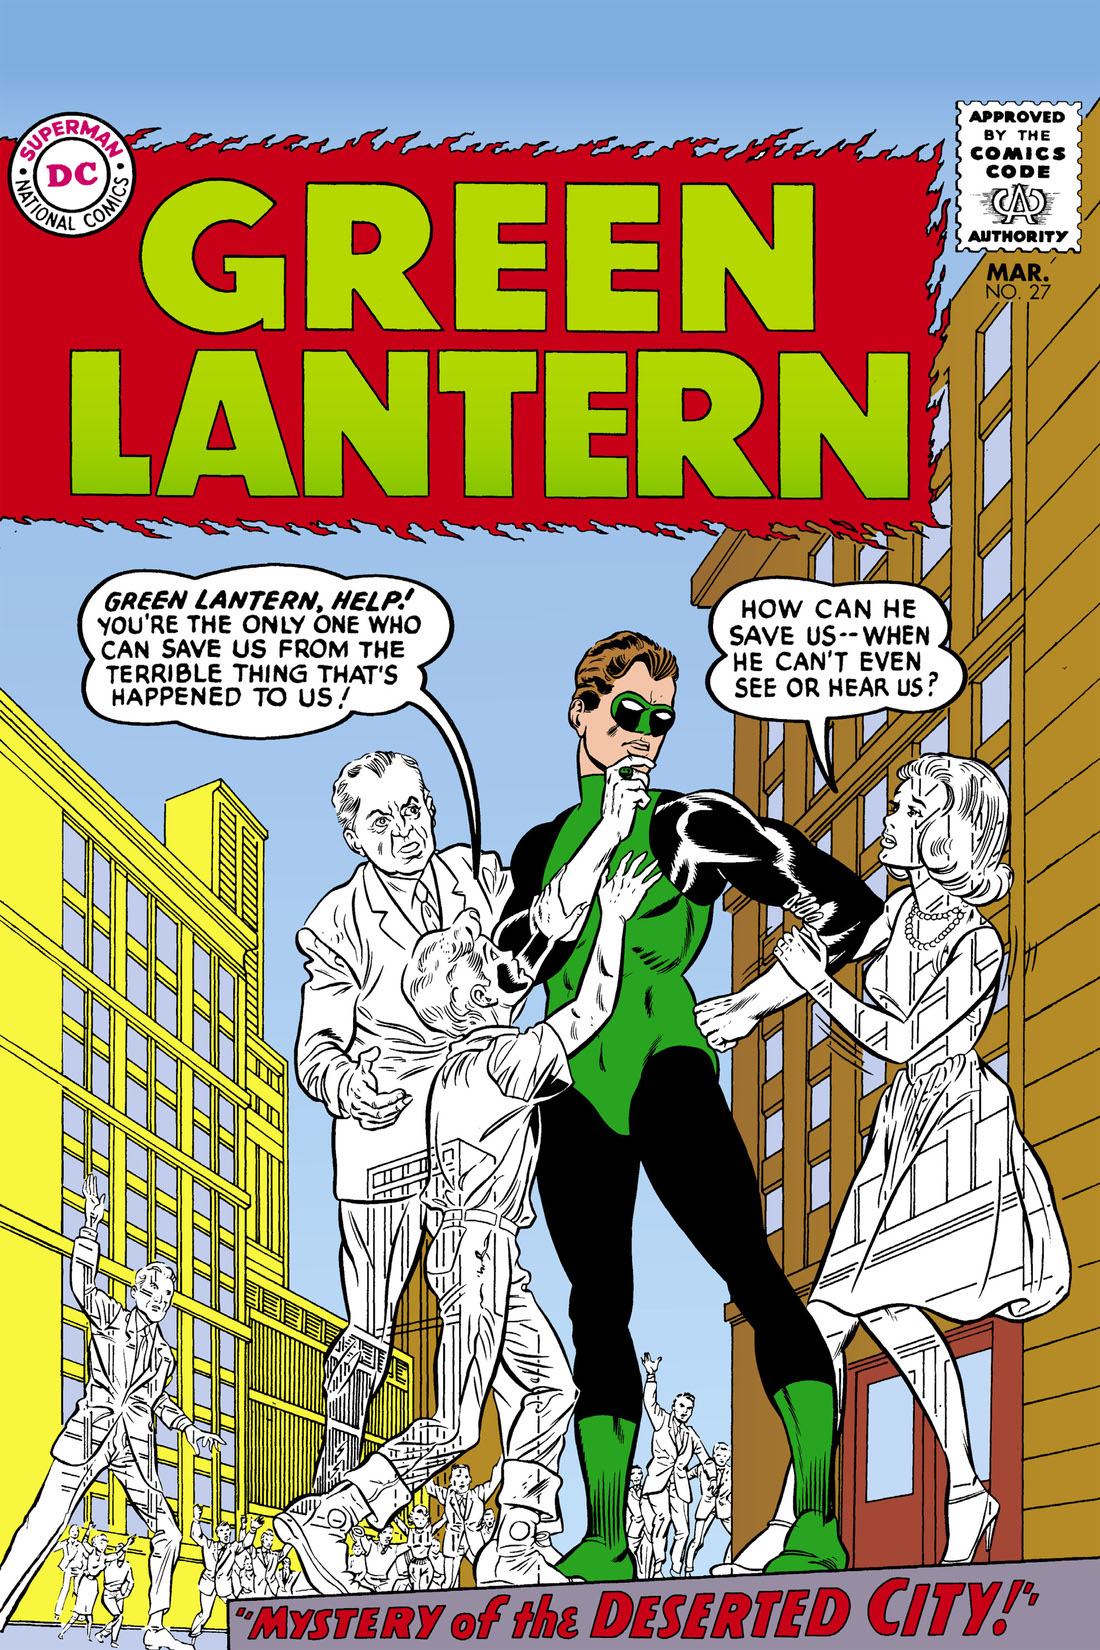 Green Lantern (1960-) #27 preview images